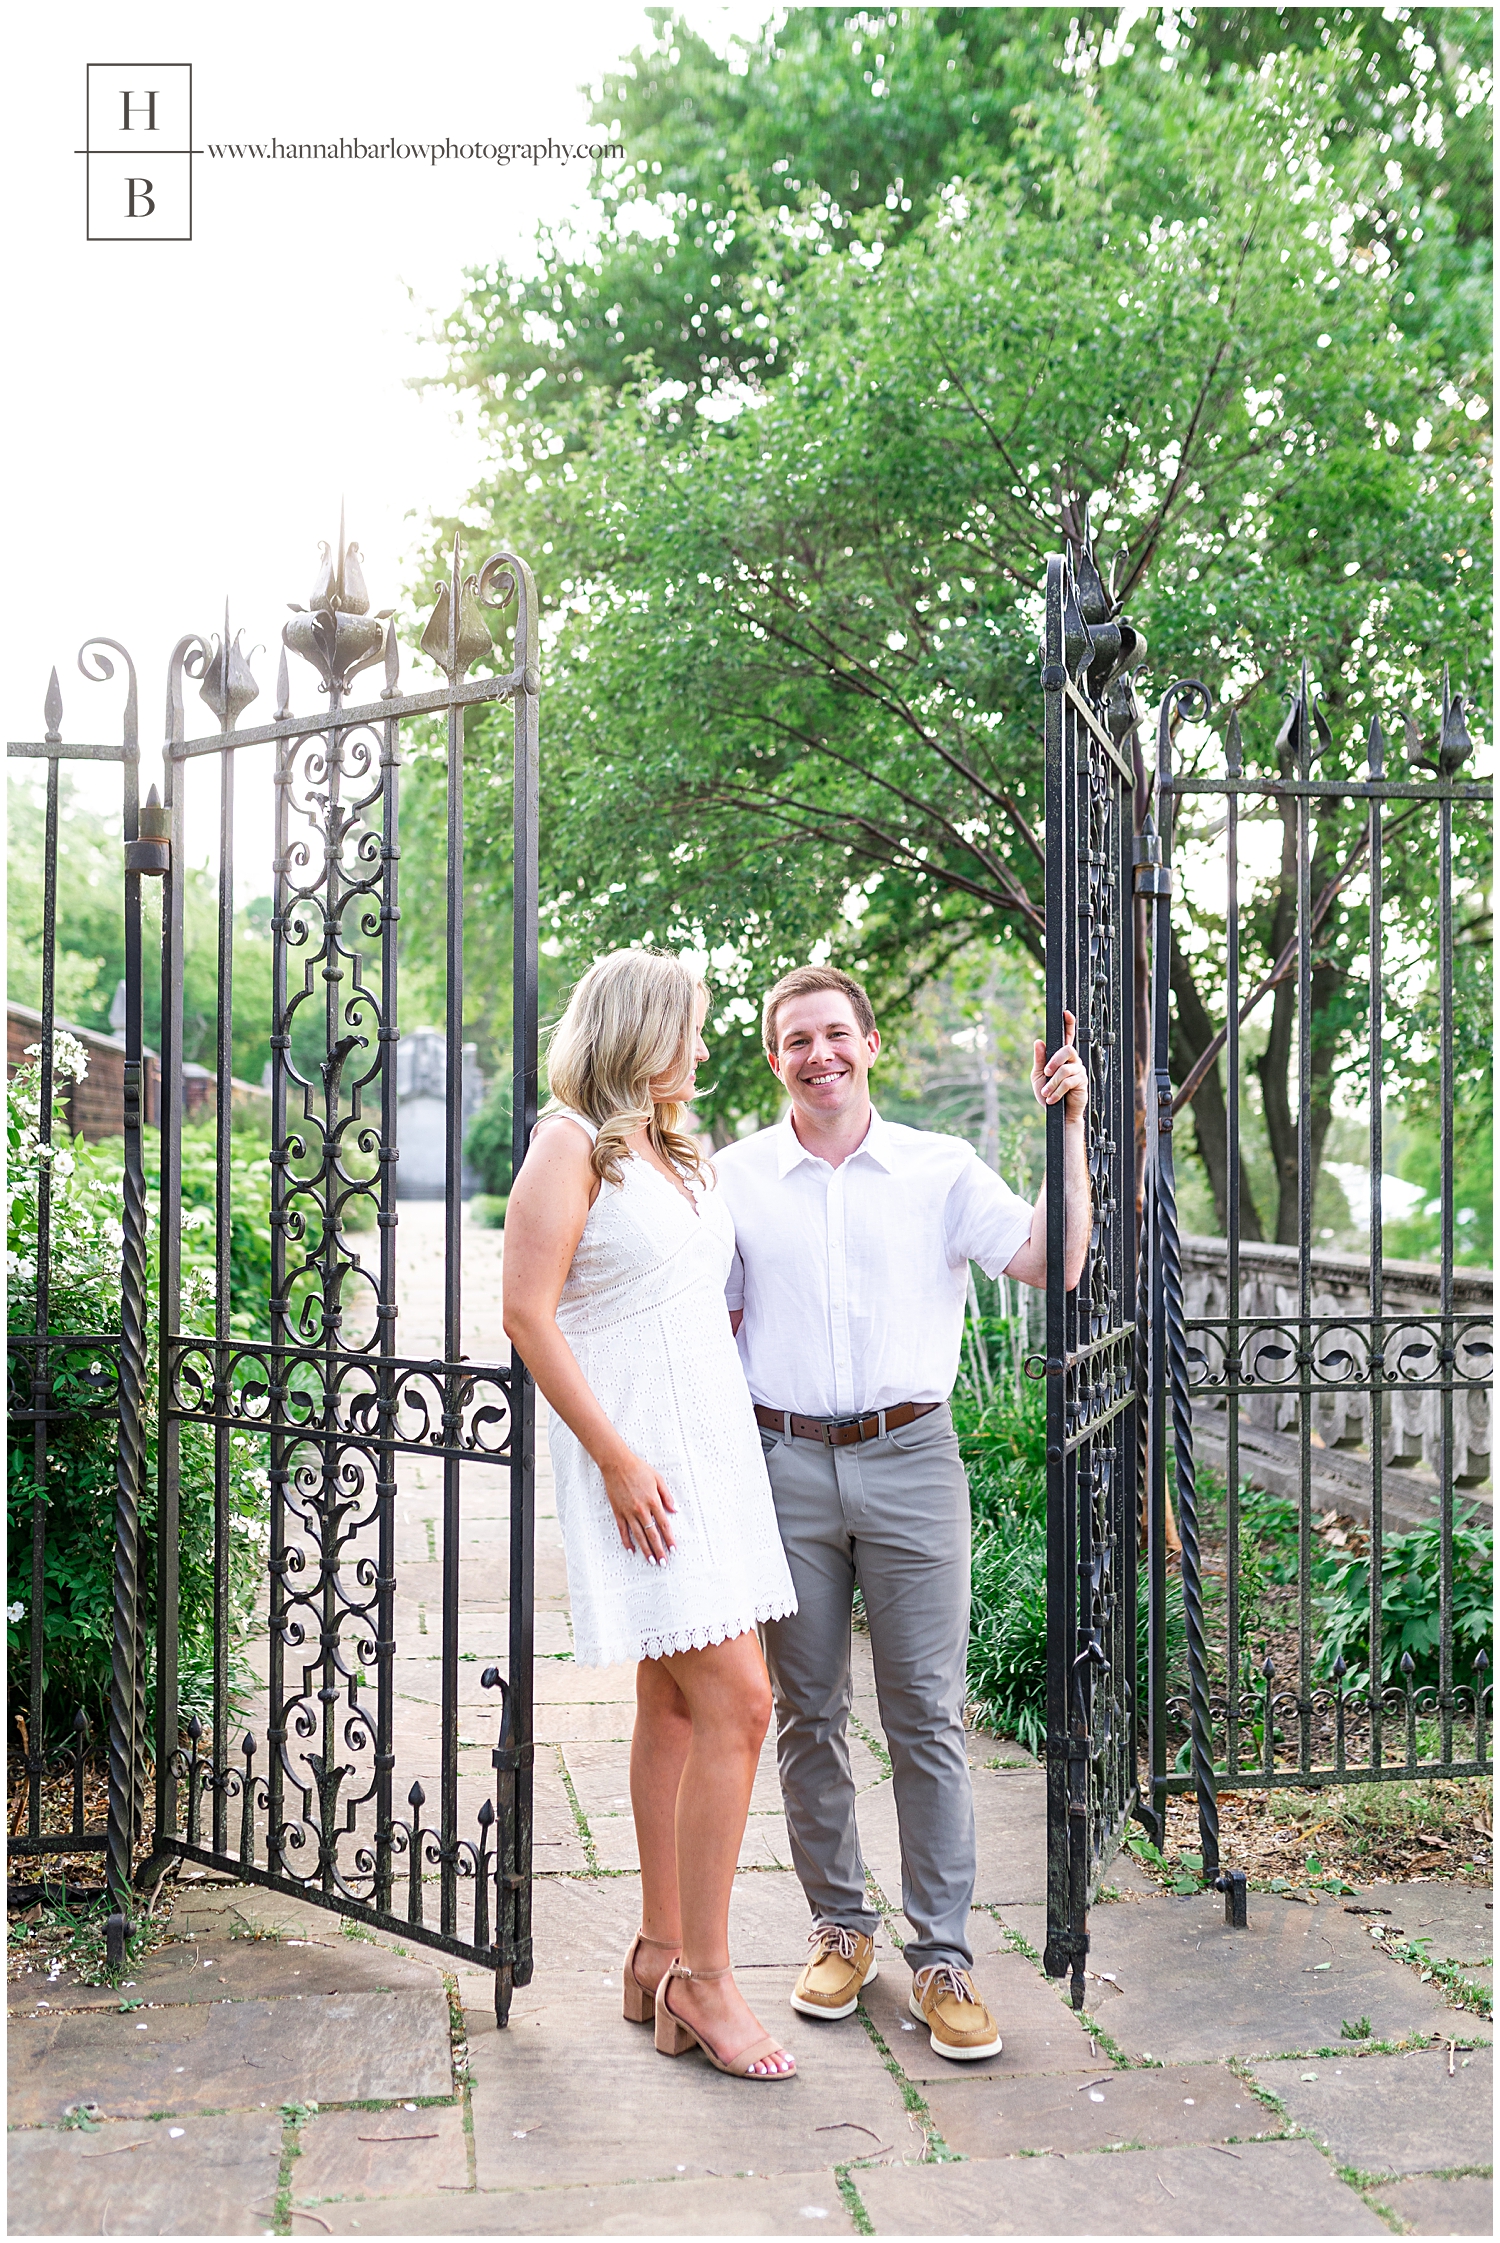 Groom stands in black iron gate opening holding embracing fiance for engagement photos.